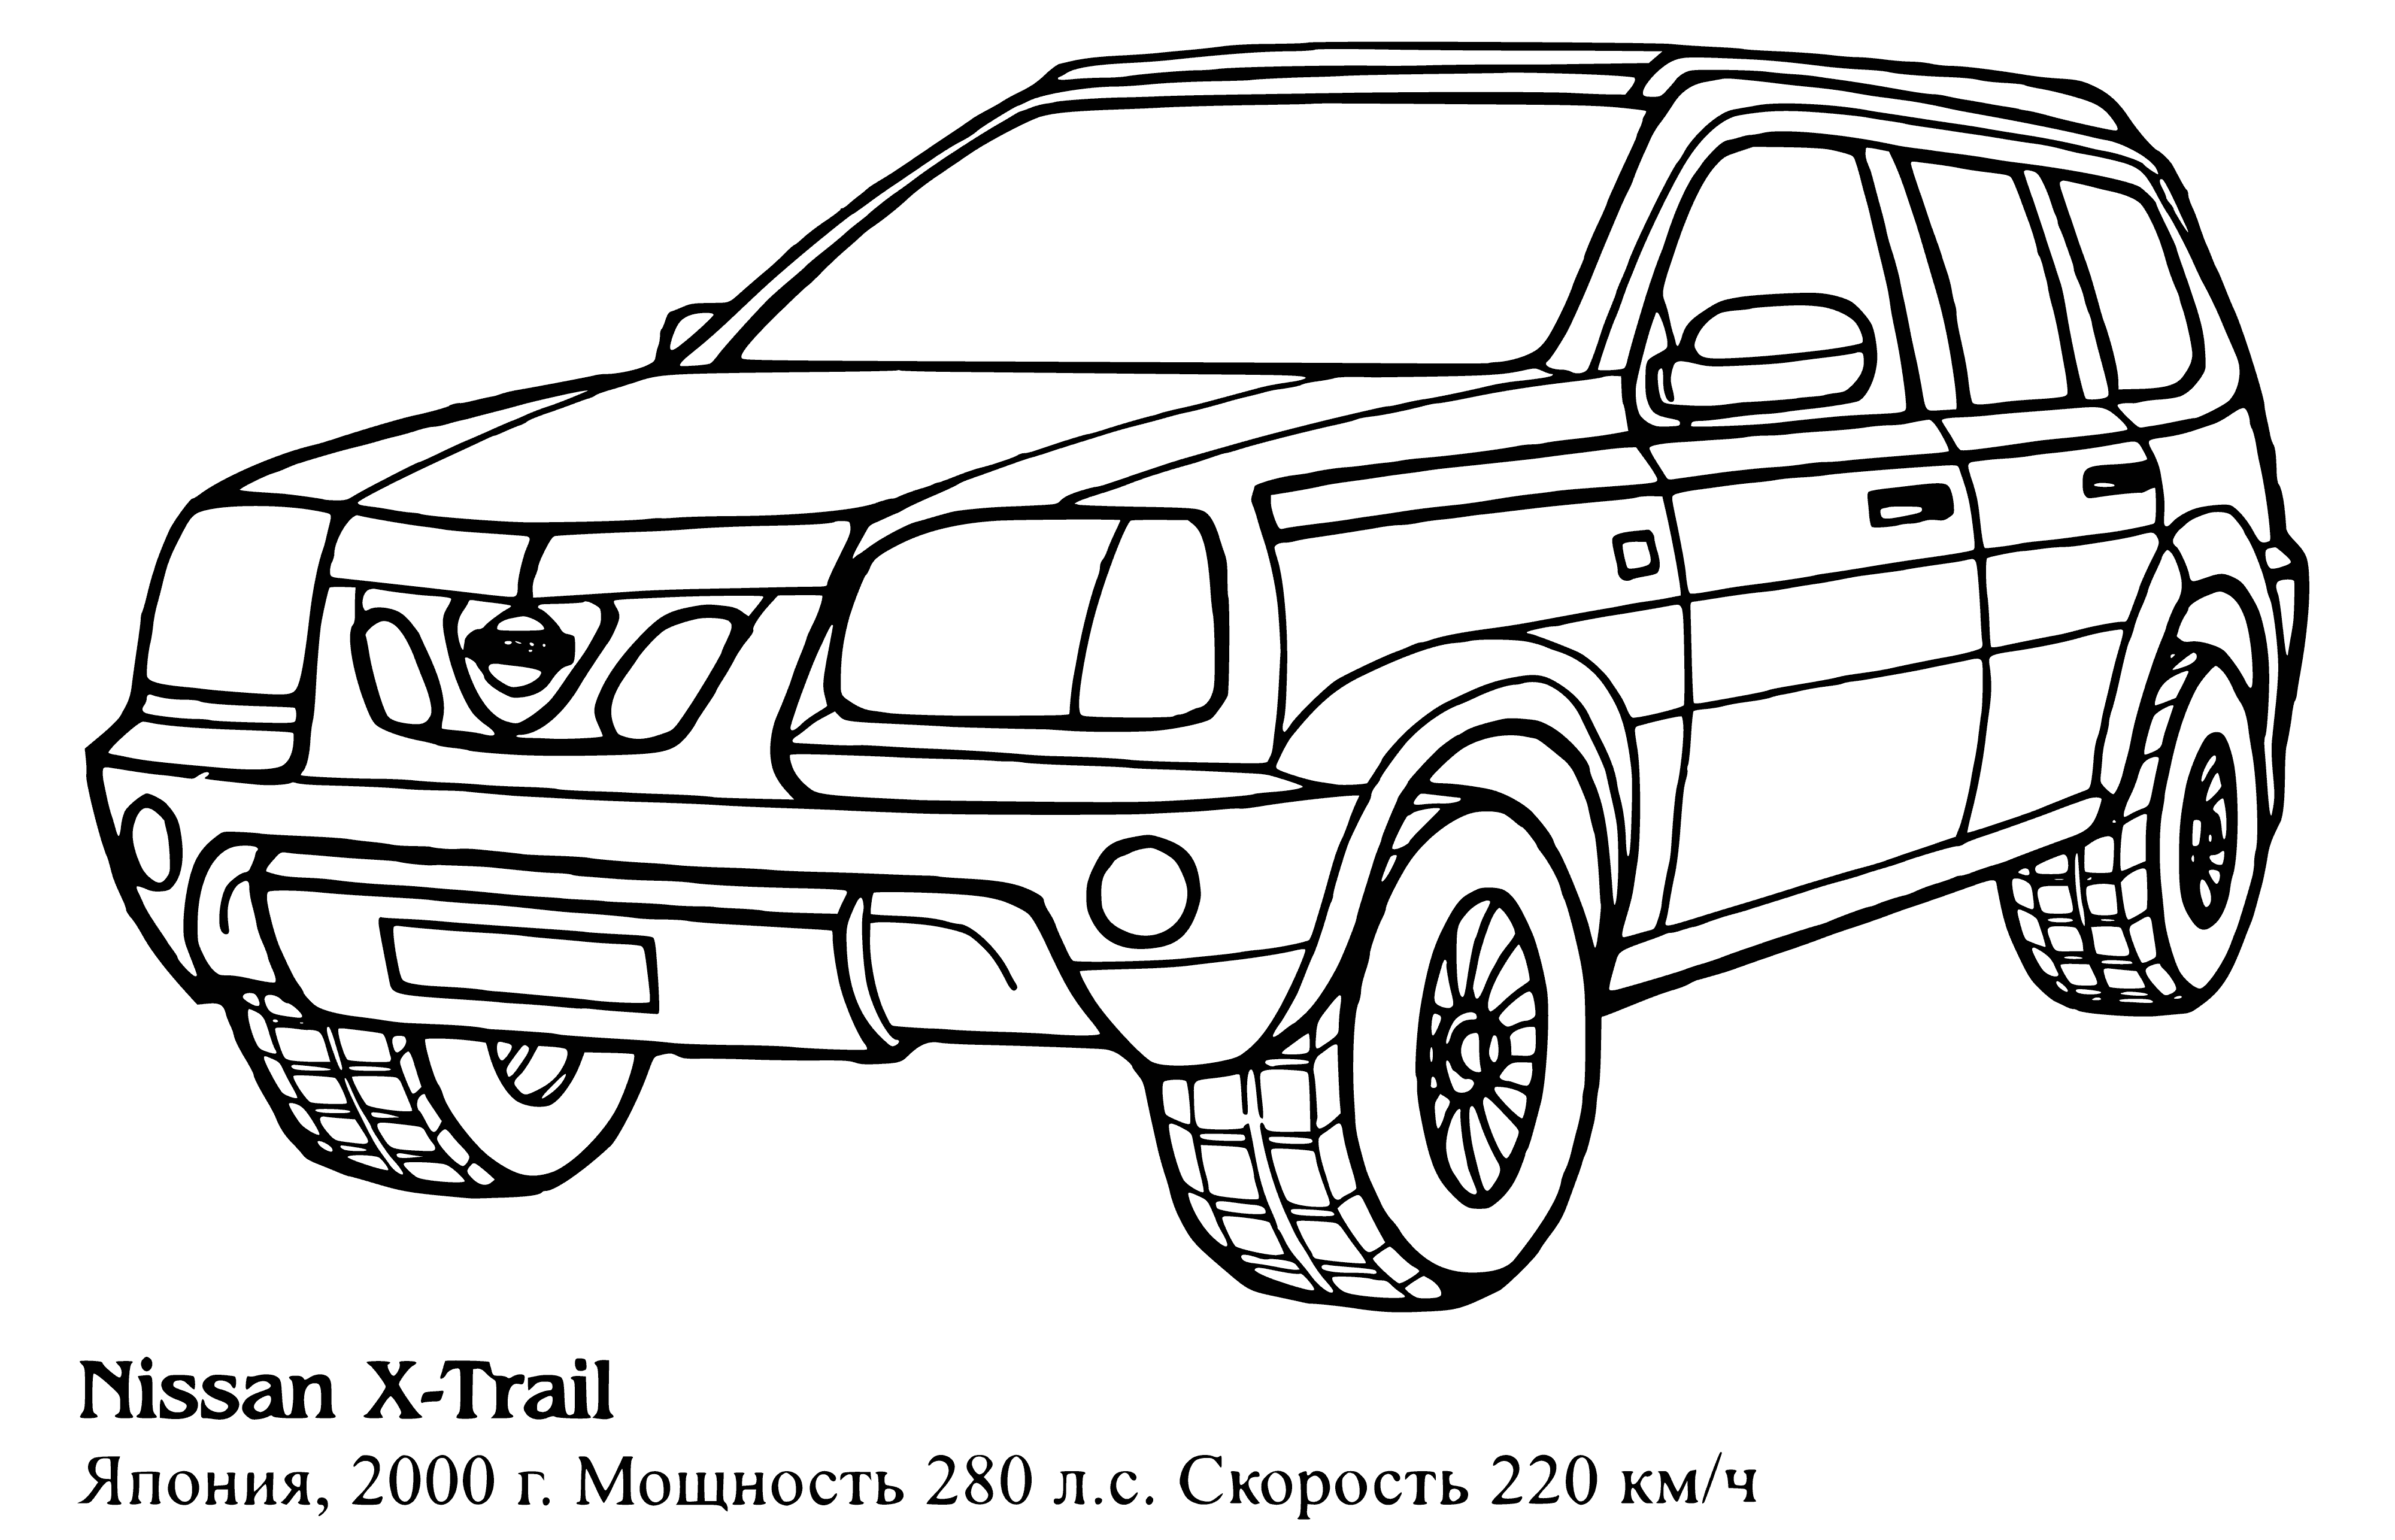 Nissan X-Trail coloring page